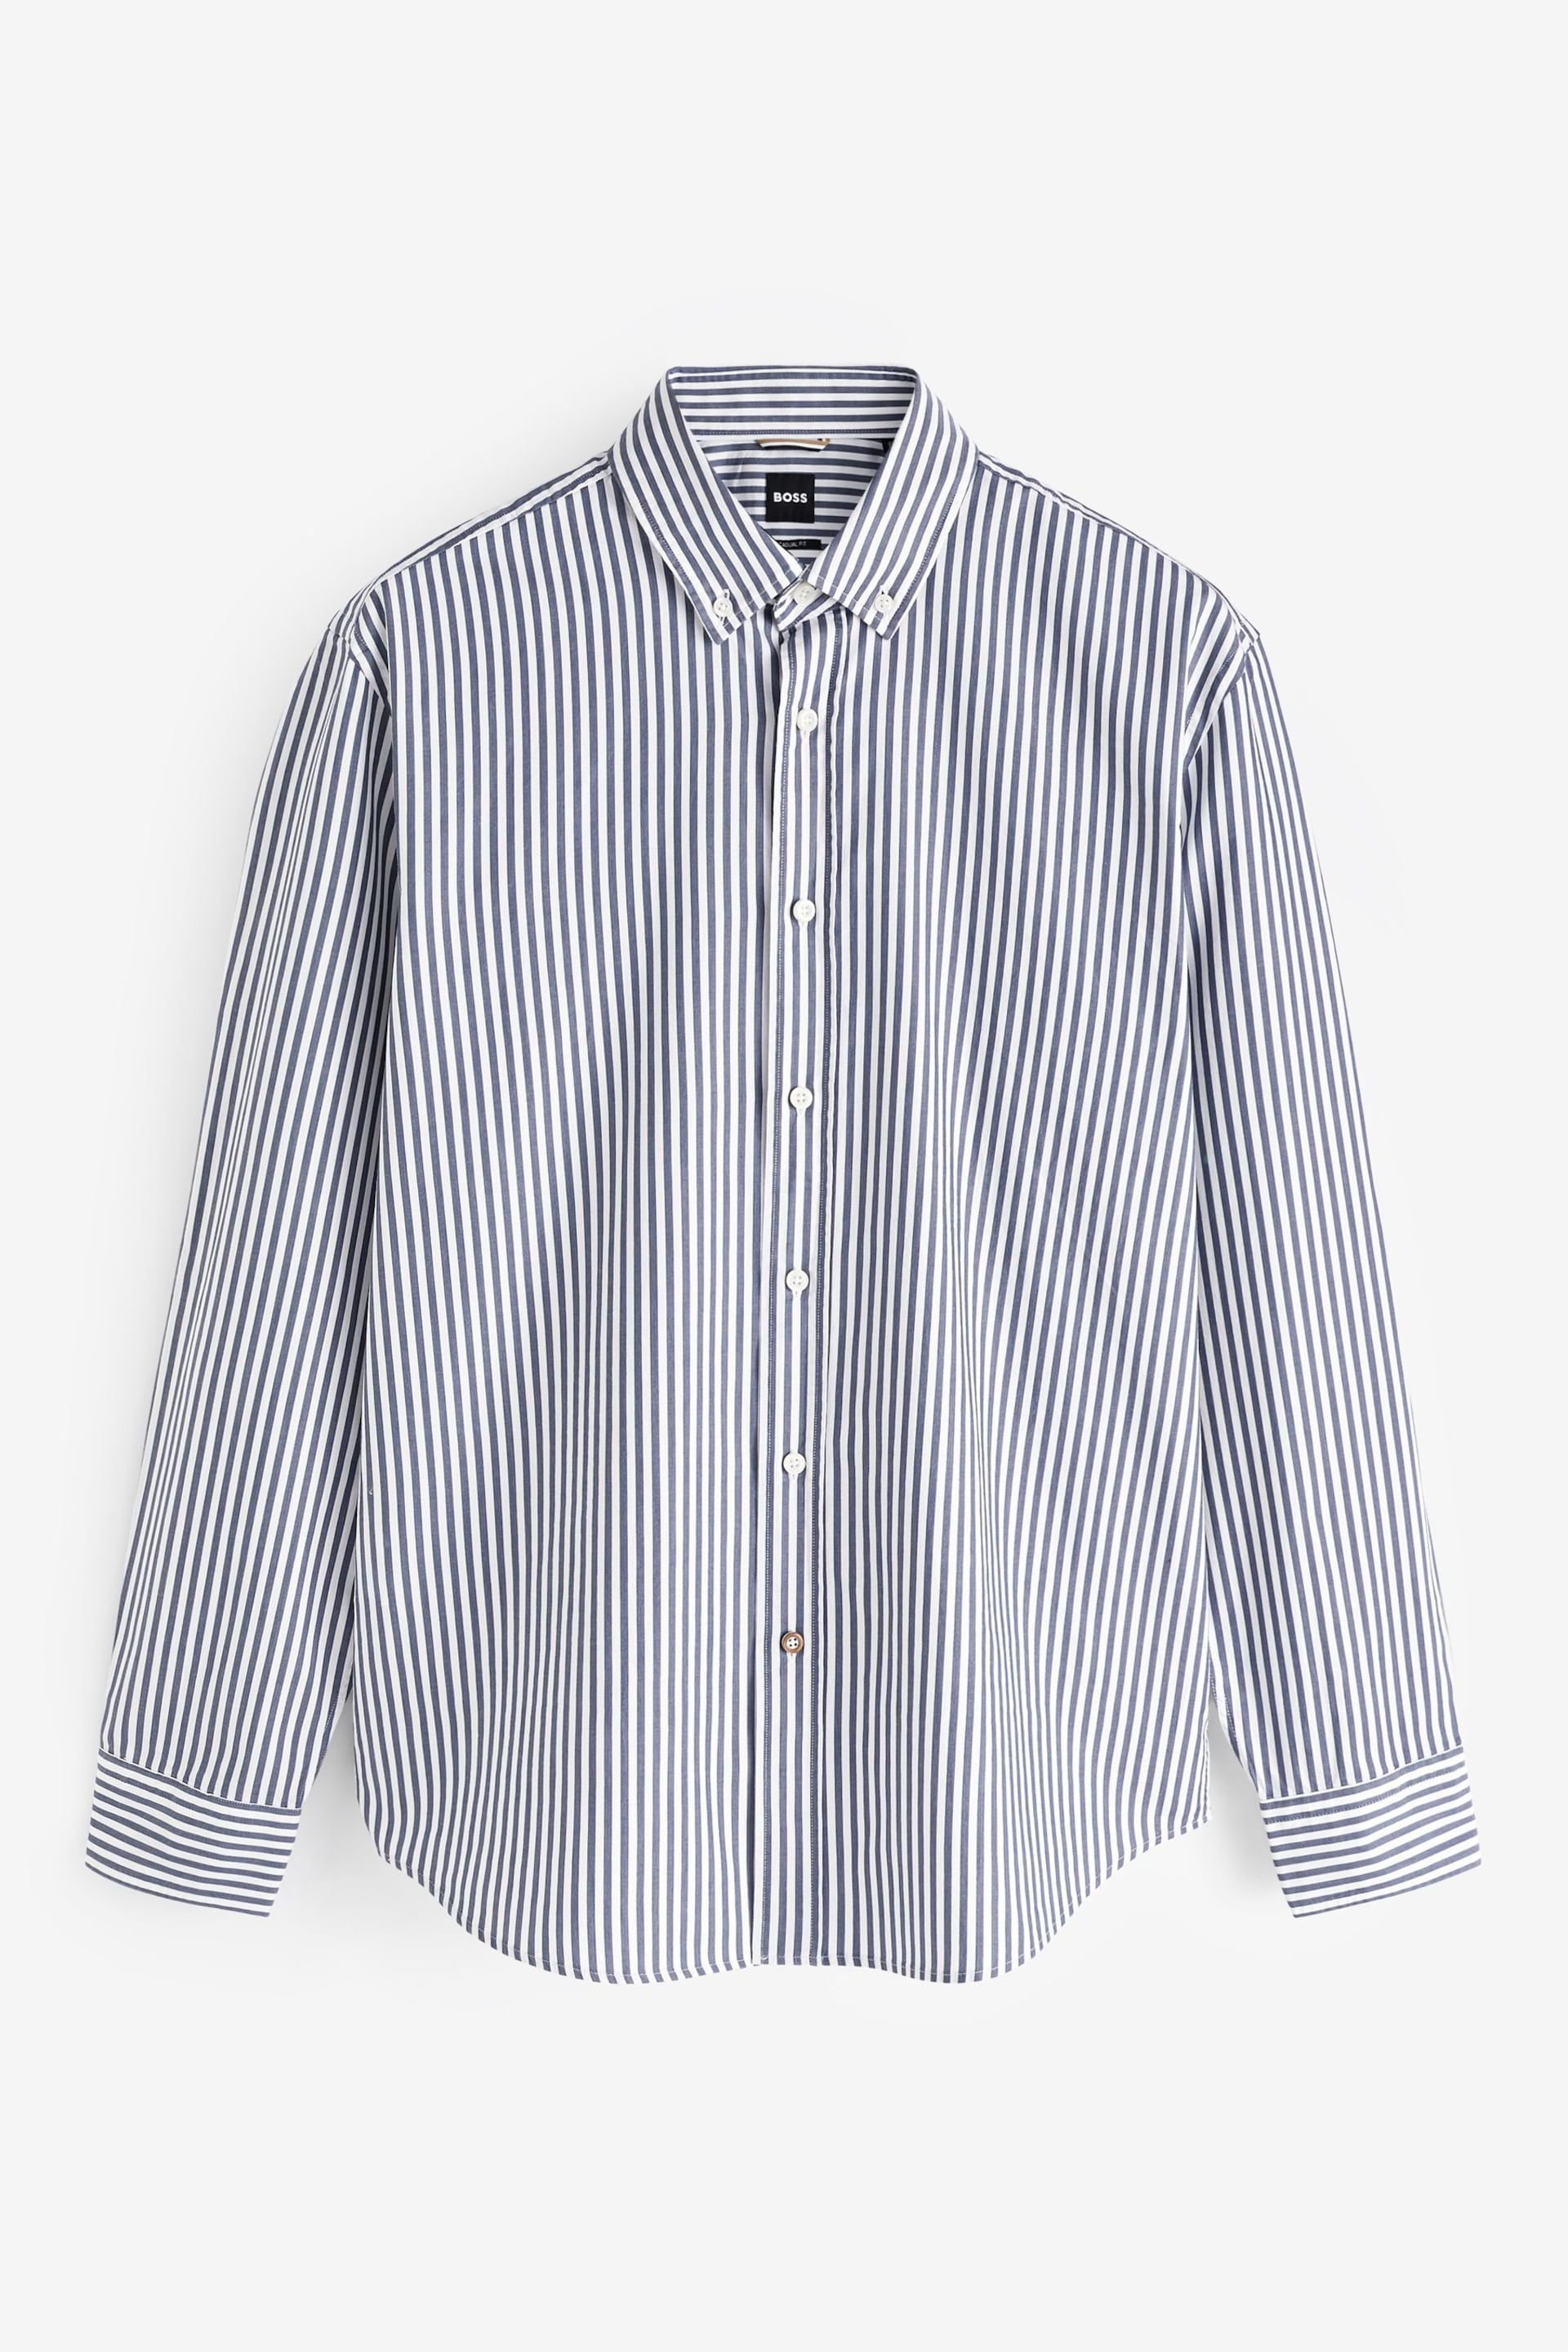 BOSS Blue Casual Fit Button-Down Shirt In Striped Cotton Twill - Image 6 of 6